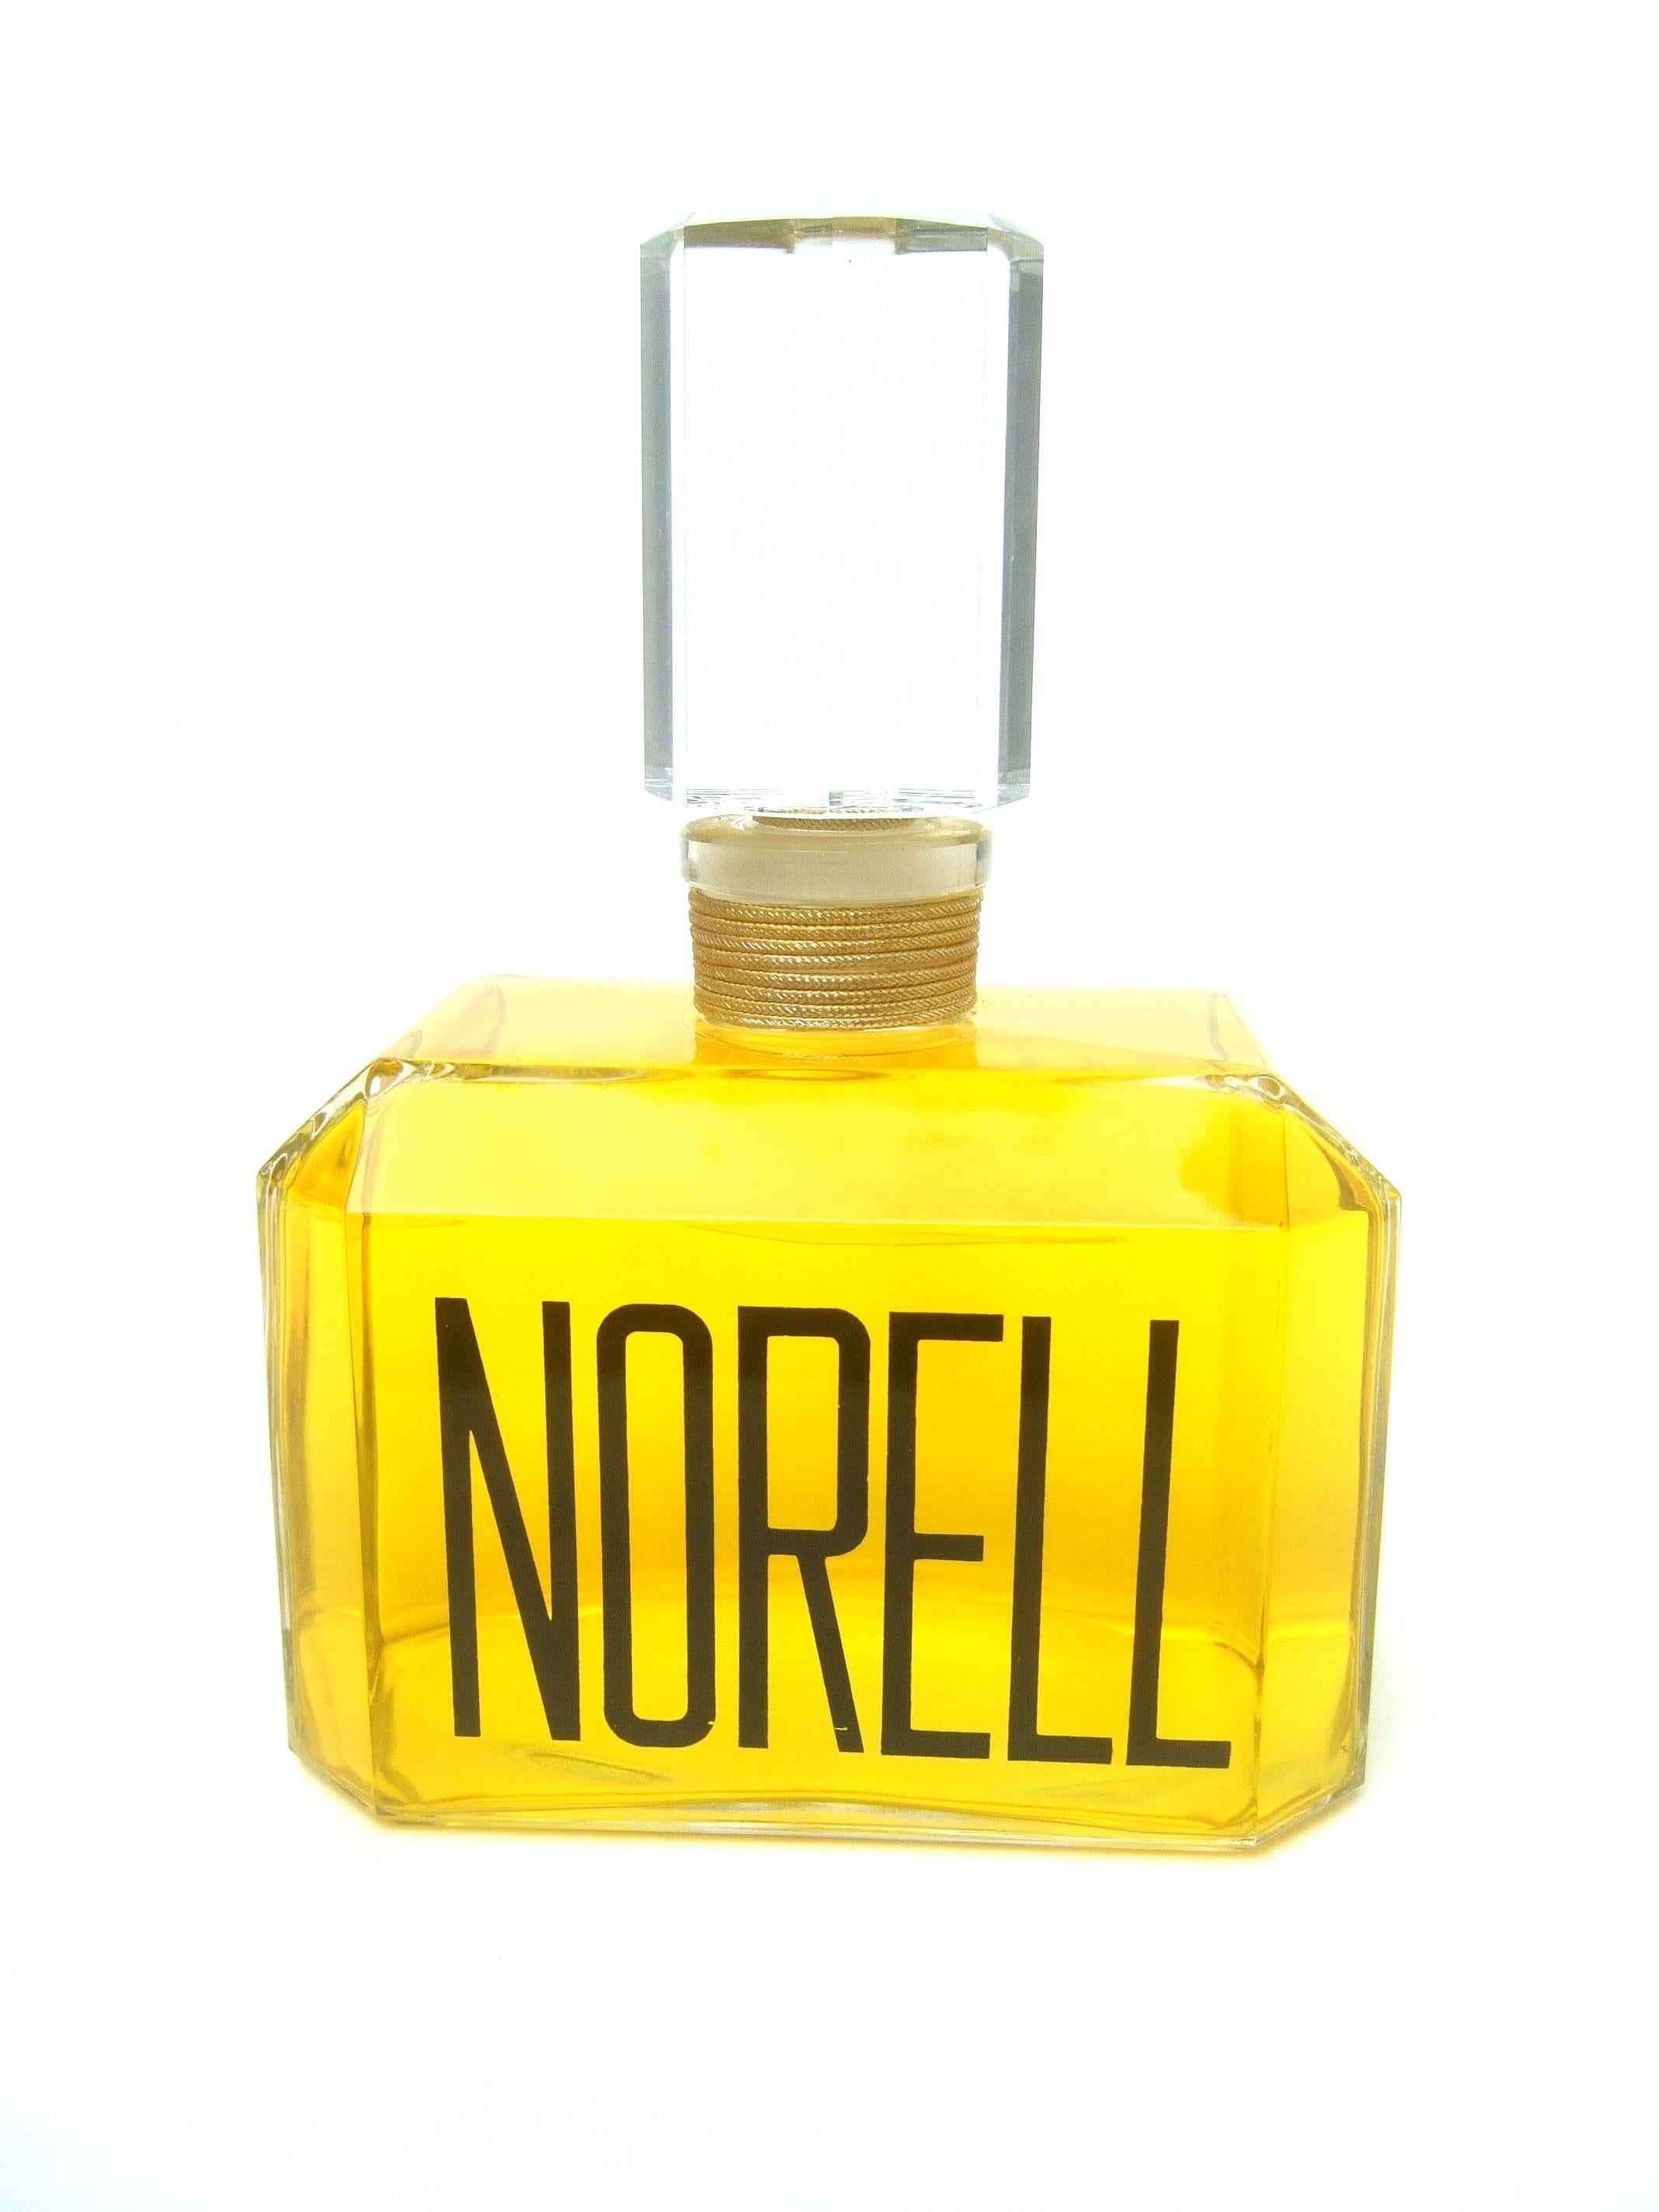 Norell Sleek large scale crystal factice display bottle 
The elegant crystal fragrance bottle was a display 
from a department store fragrance counter

The large scale replica bottle is designed with 
a cut glass crystal stopper. The